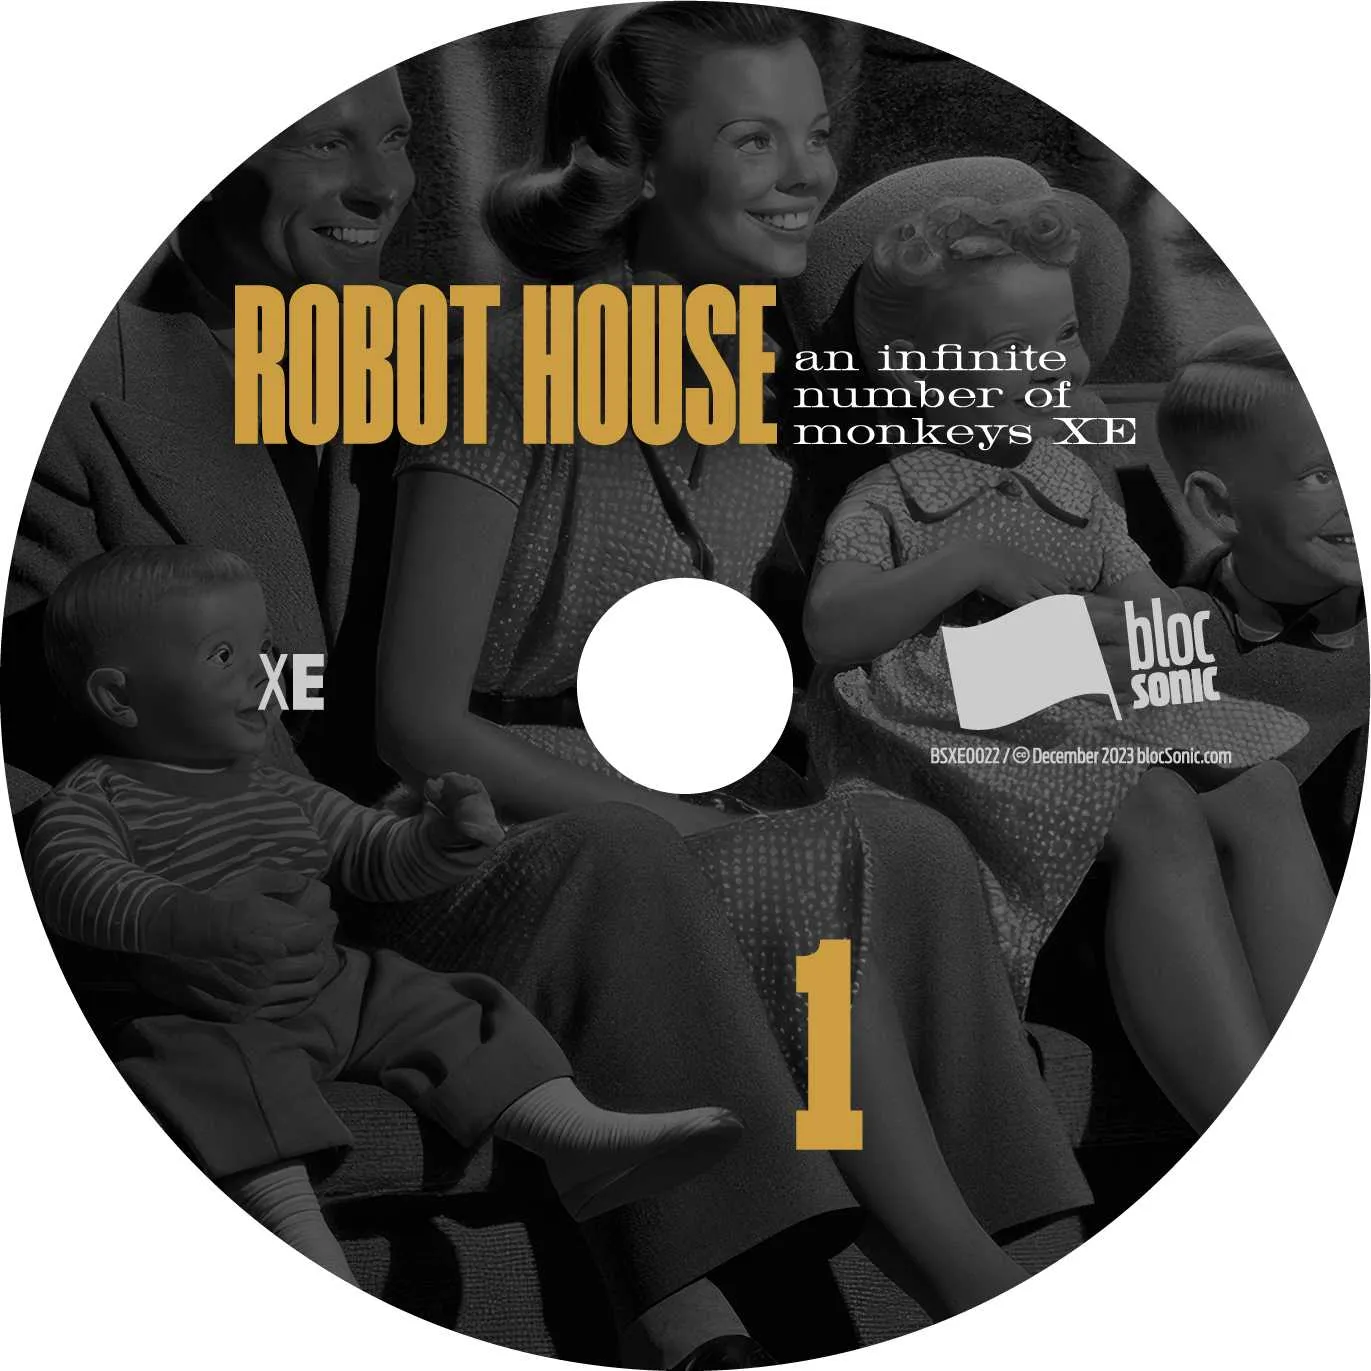 Album disc for “An Infinite Number Of Monkeys XE” by Robot House